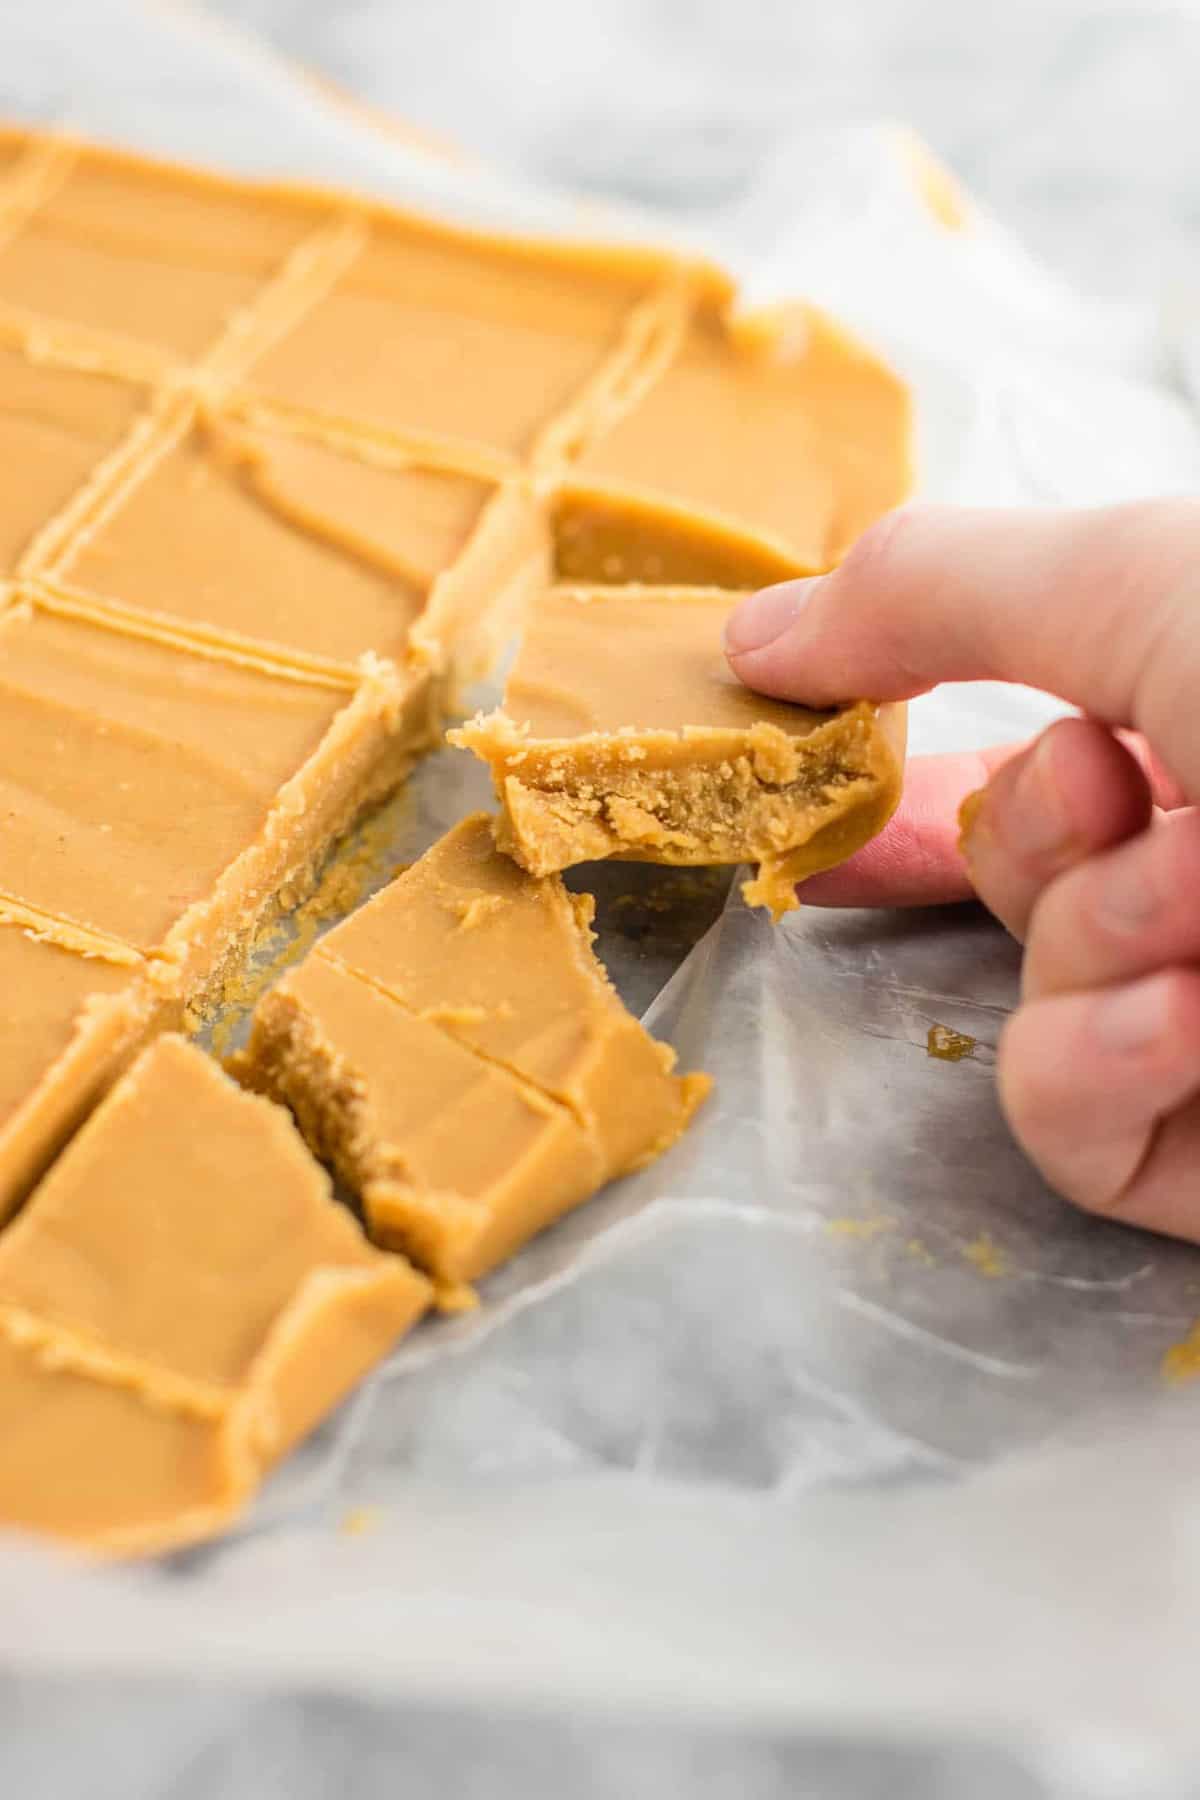 Ultimate healthy vegan peanut butter fudge recipe (vegan, gluten free) An easy dessert you don’t have to feel guilty about! #healthyfudge #healthyveganfudge #vegandessert #peanutbutter #glutenfree #vegan